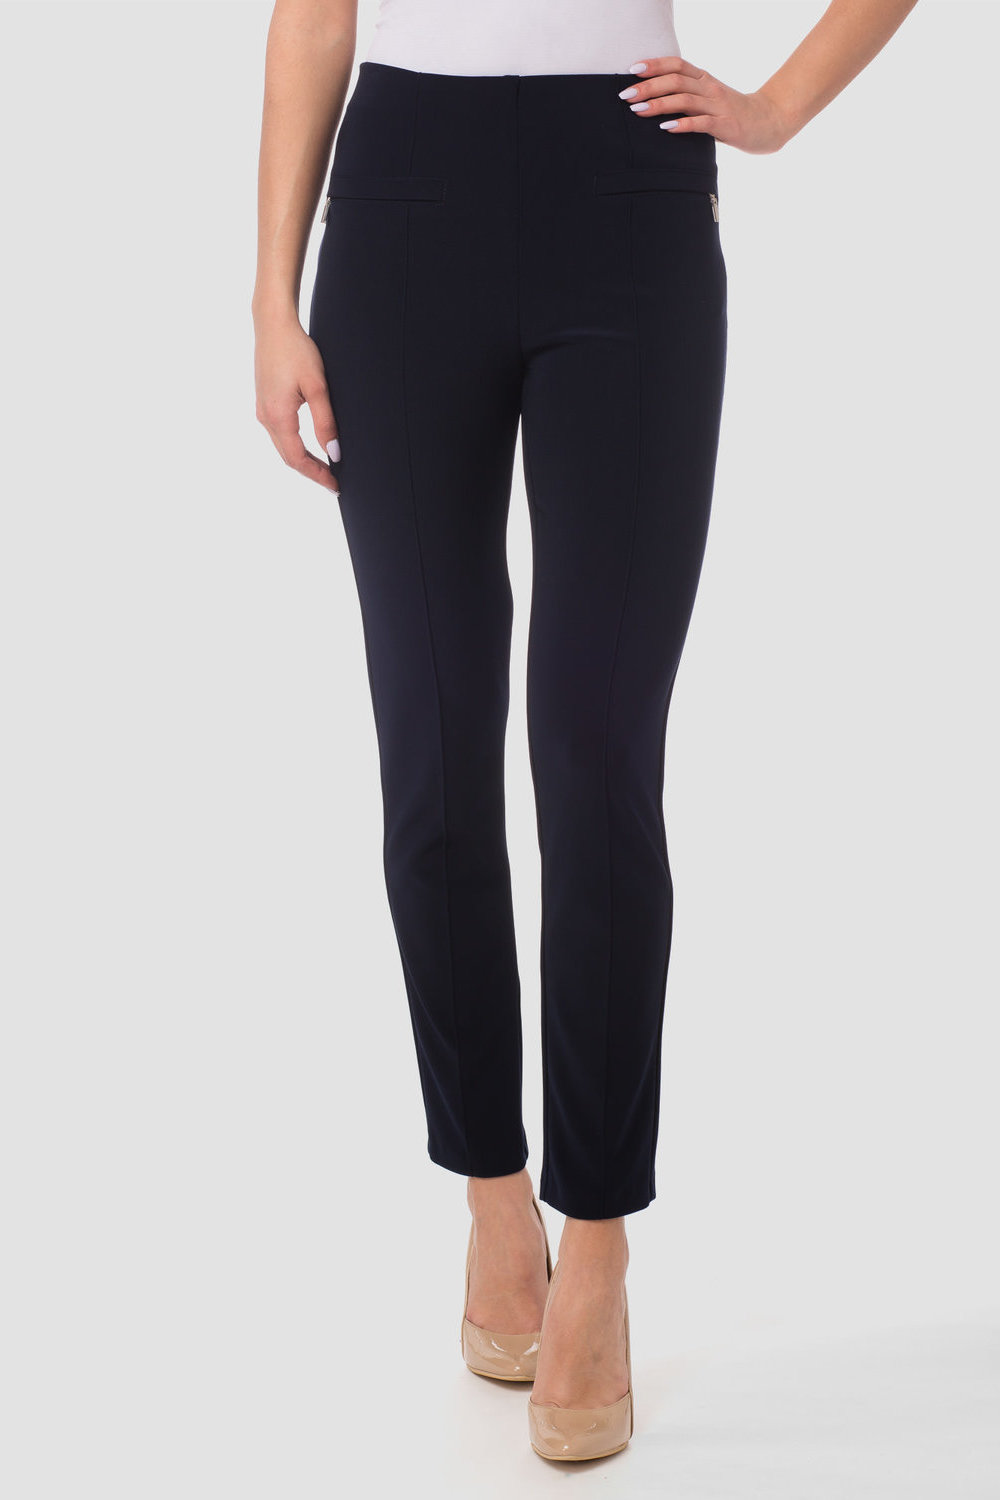 Joseph Ribkoff Midnight Blue Stretch Pants with Ankle Cut Outs Style 171173